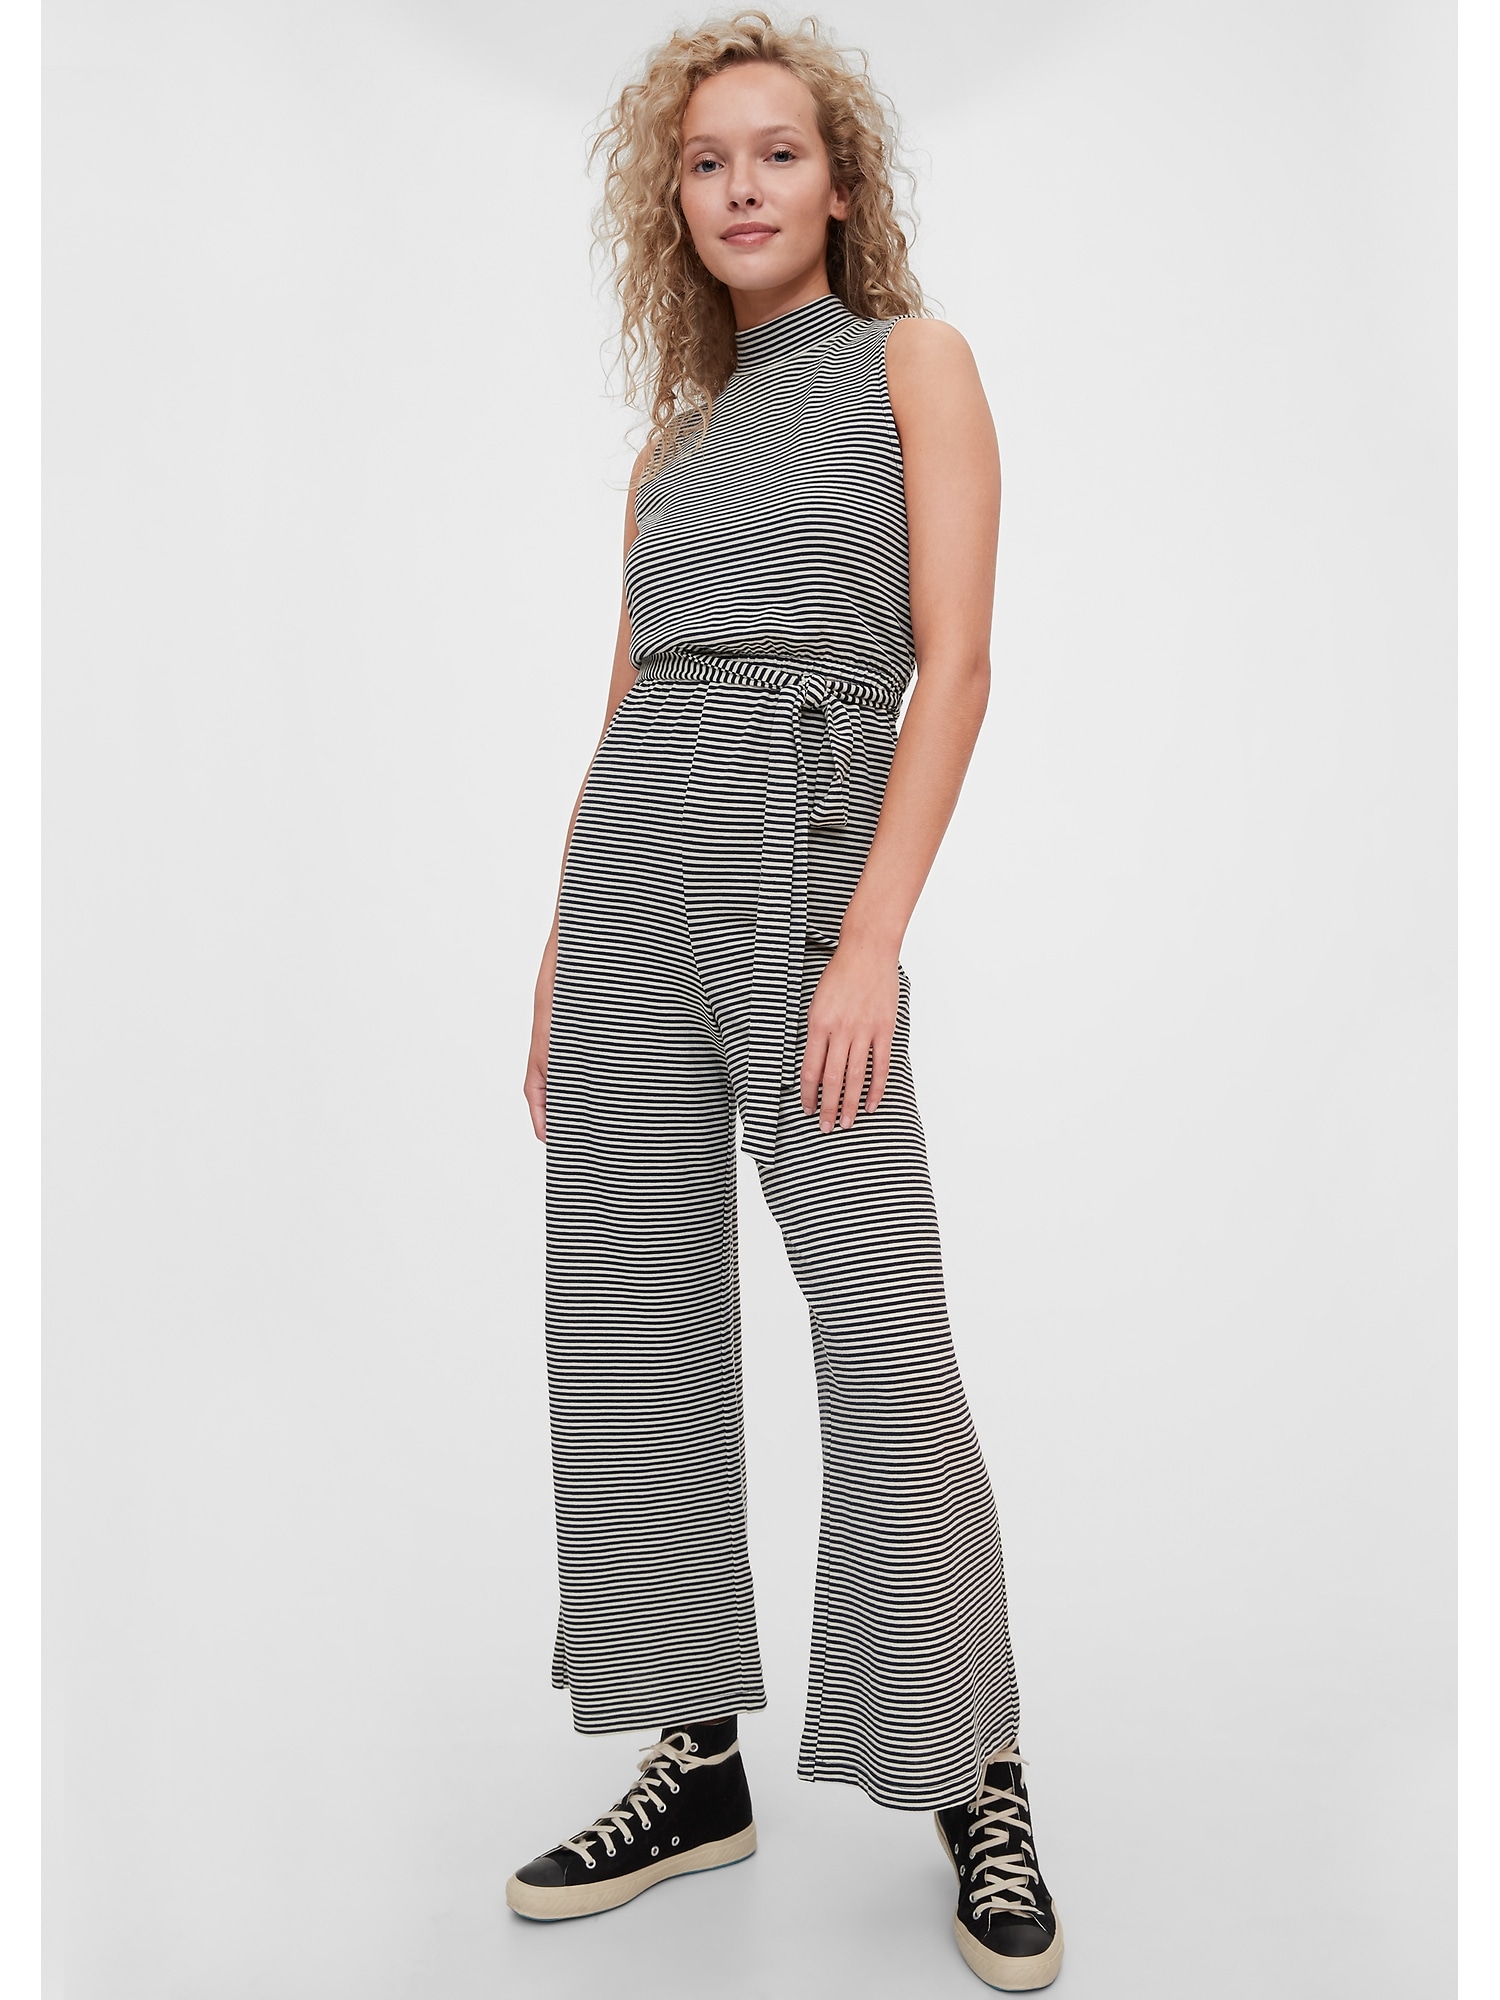 Tall Jumpsuits for Women and Junior Girls